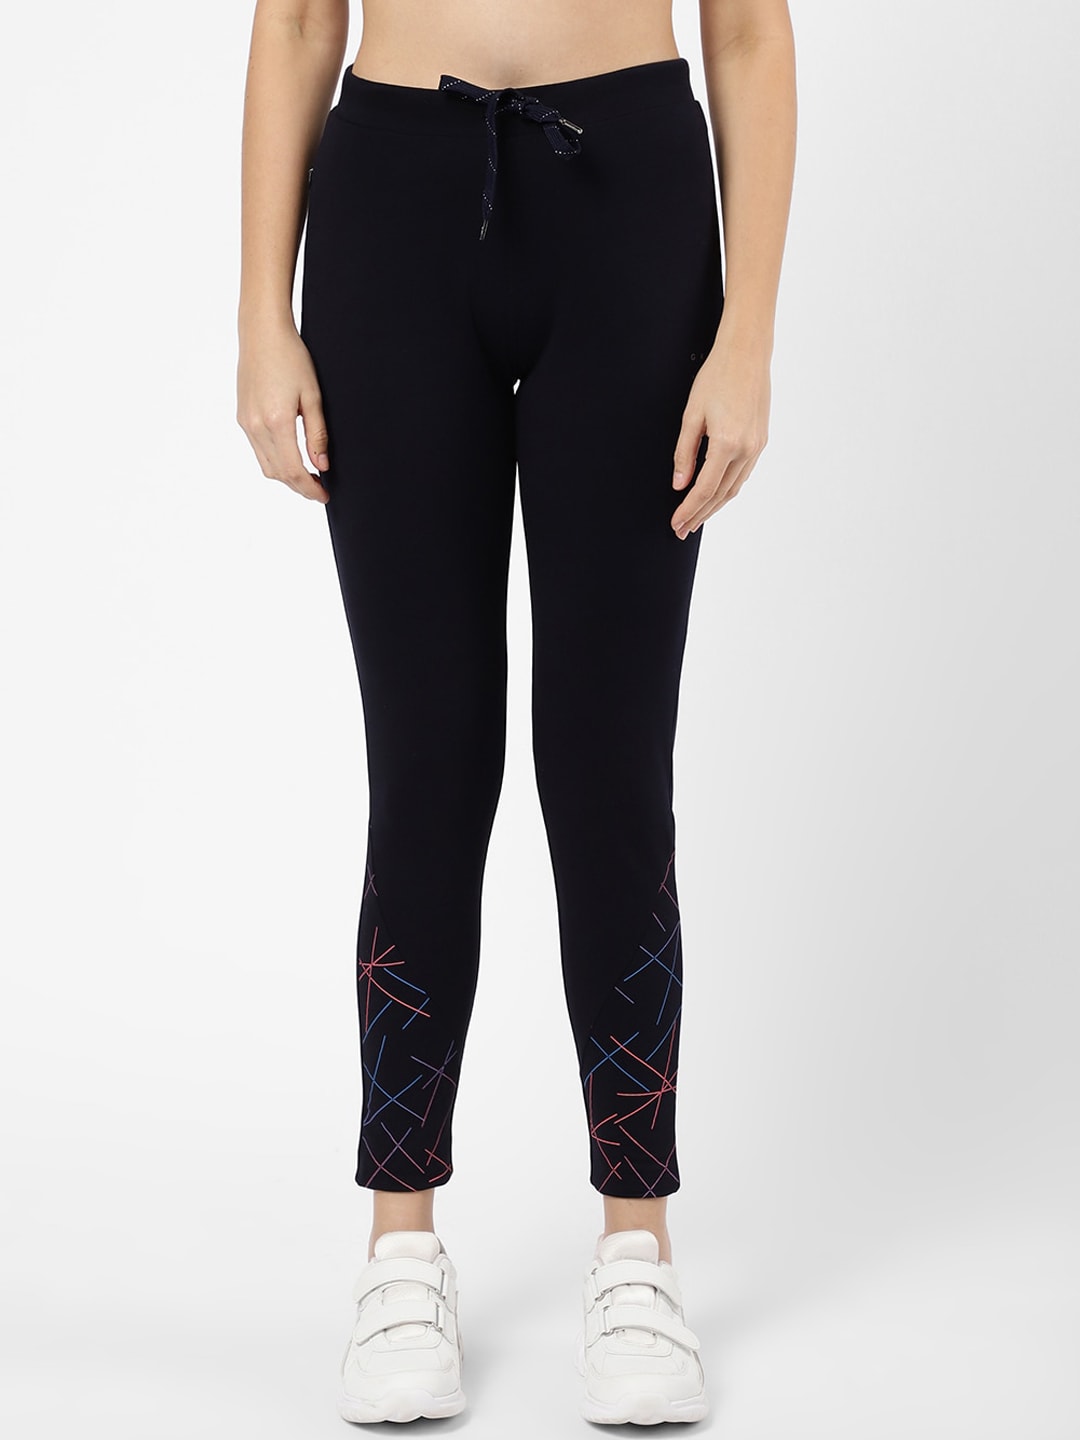 Sweet Dreams Women Navy Blue Dry-Fit Cotton Slim-Fit Track Pants Price in India